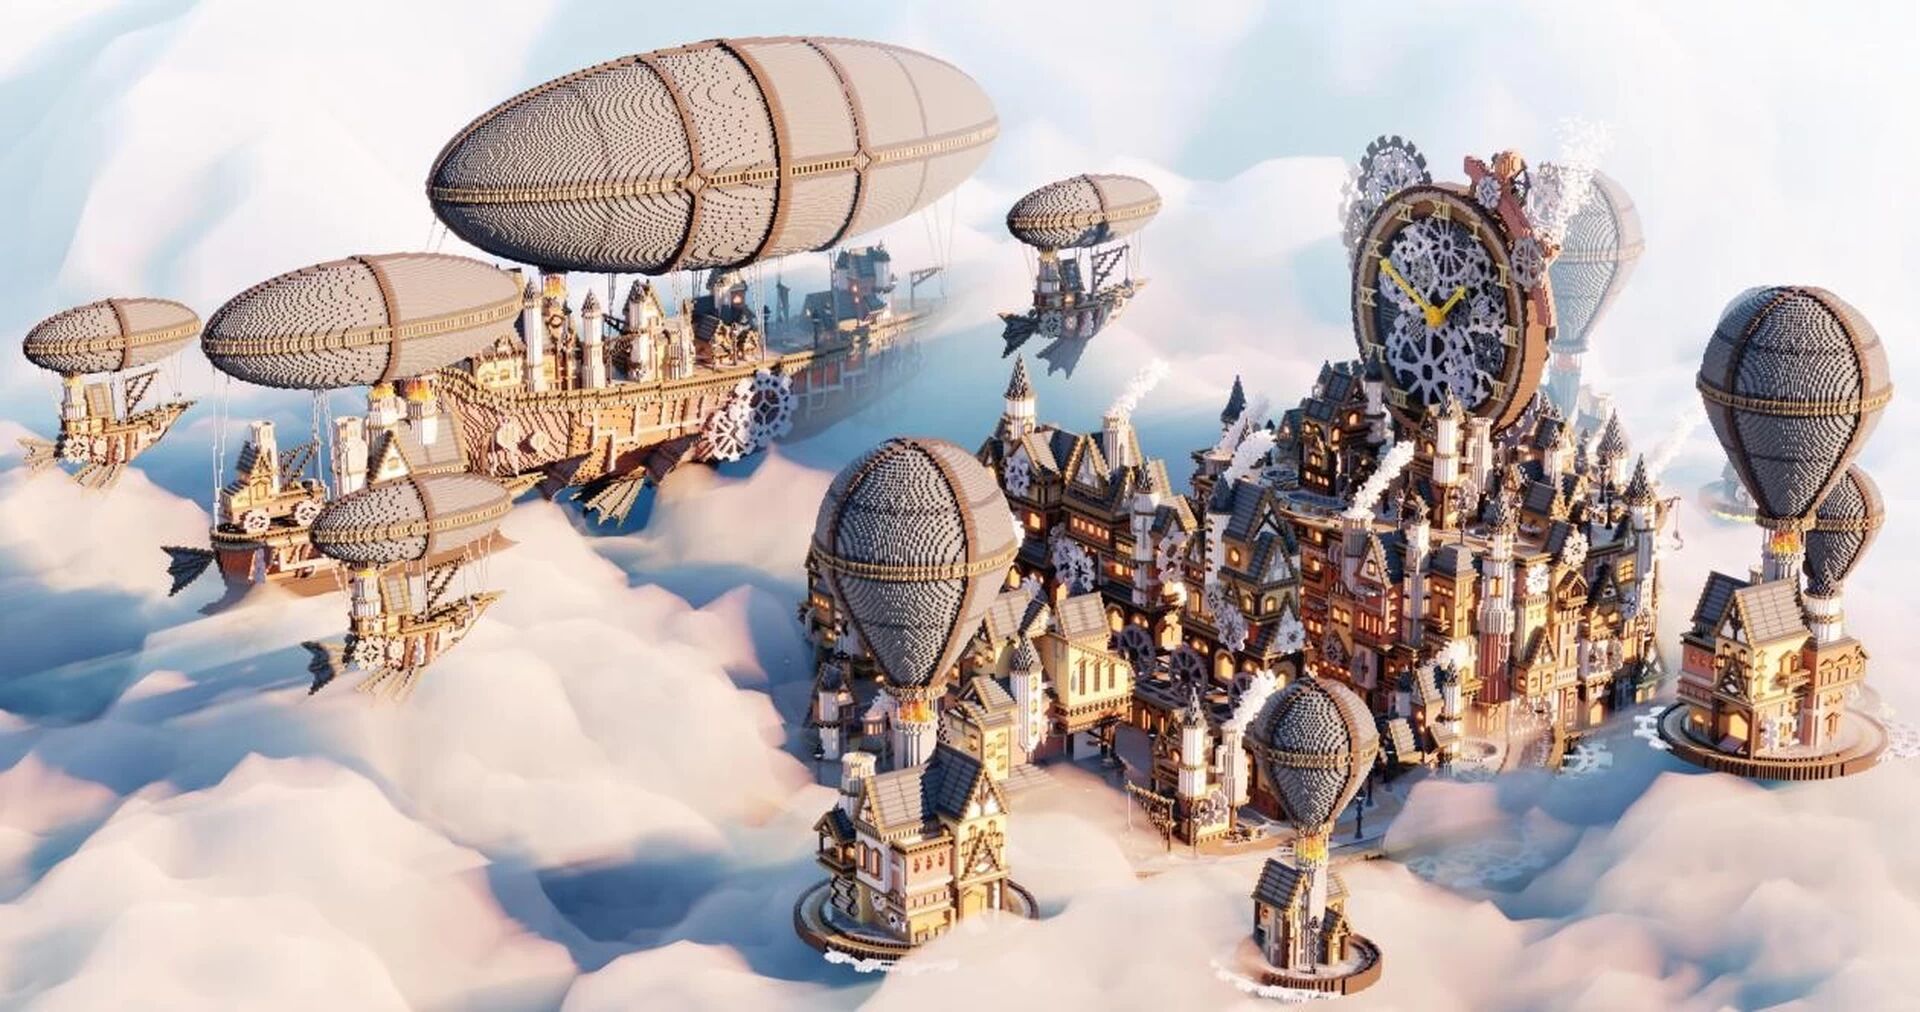 Klap parallel Vrouw PlanetMinecraft on Twitter: "One of the top submissions from this weekend  is this Steampunk City by @aderlyon build team! Download and explore the  city, its many airships and hot air balloons! #Minecraft